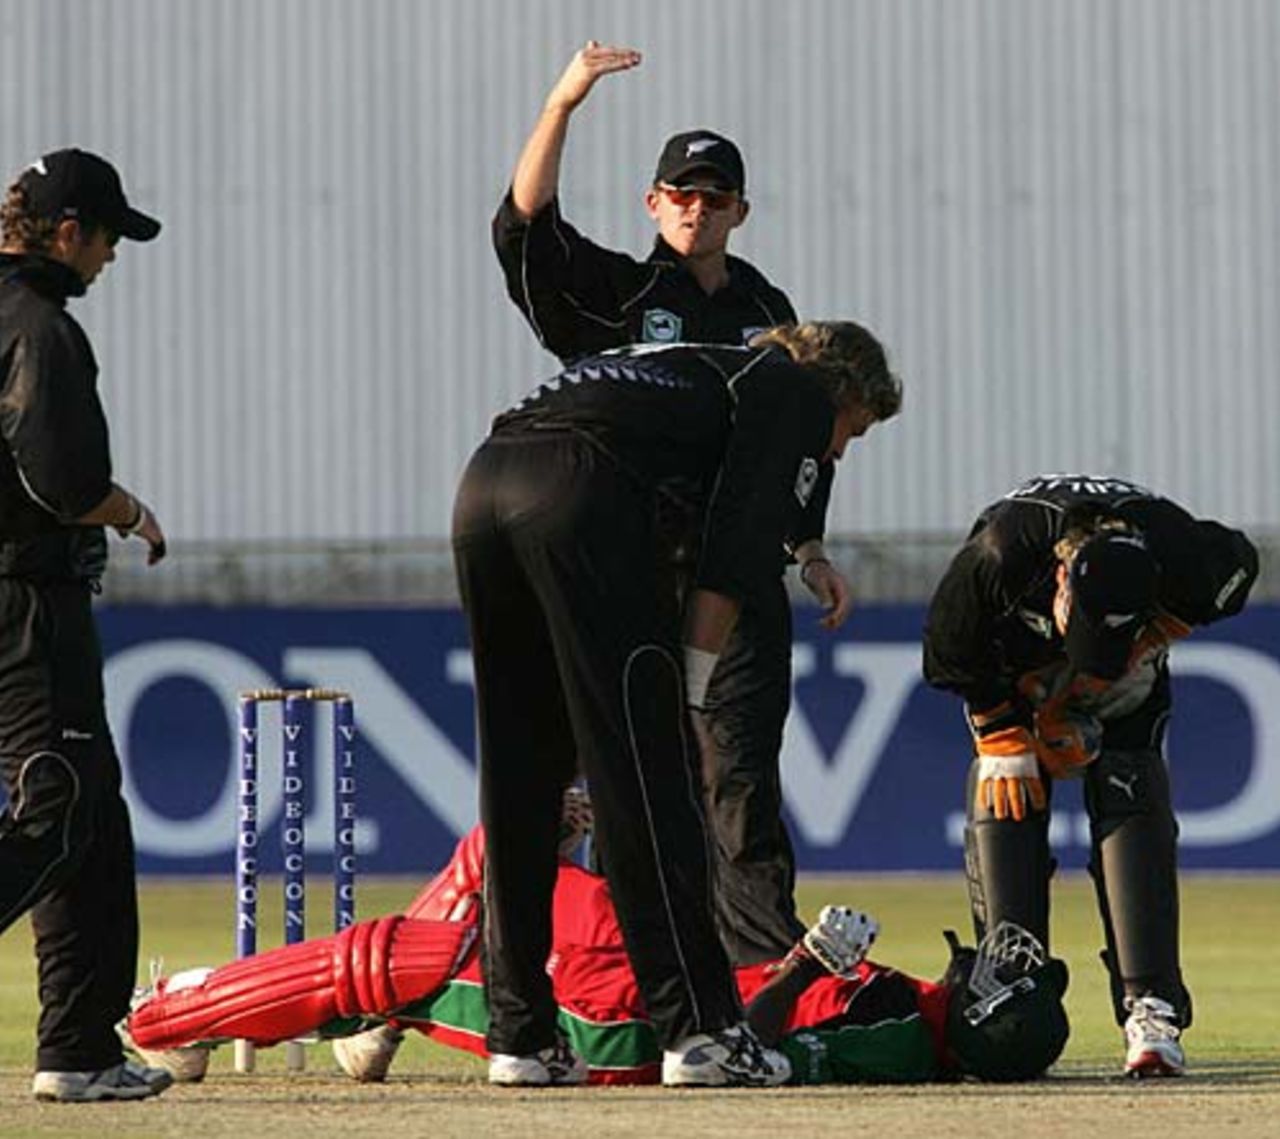 Blessing Mahwire lies prostrate after being felled by Jacon Oram, New Zealand v Zimbabwe, August 24, 2005